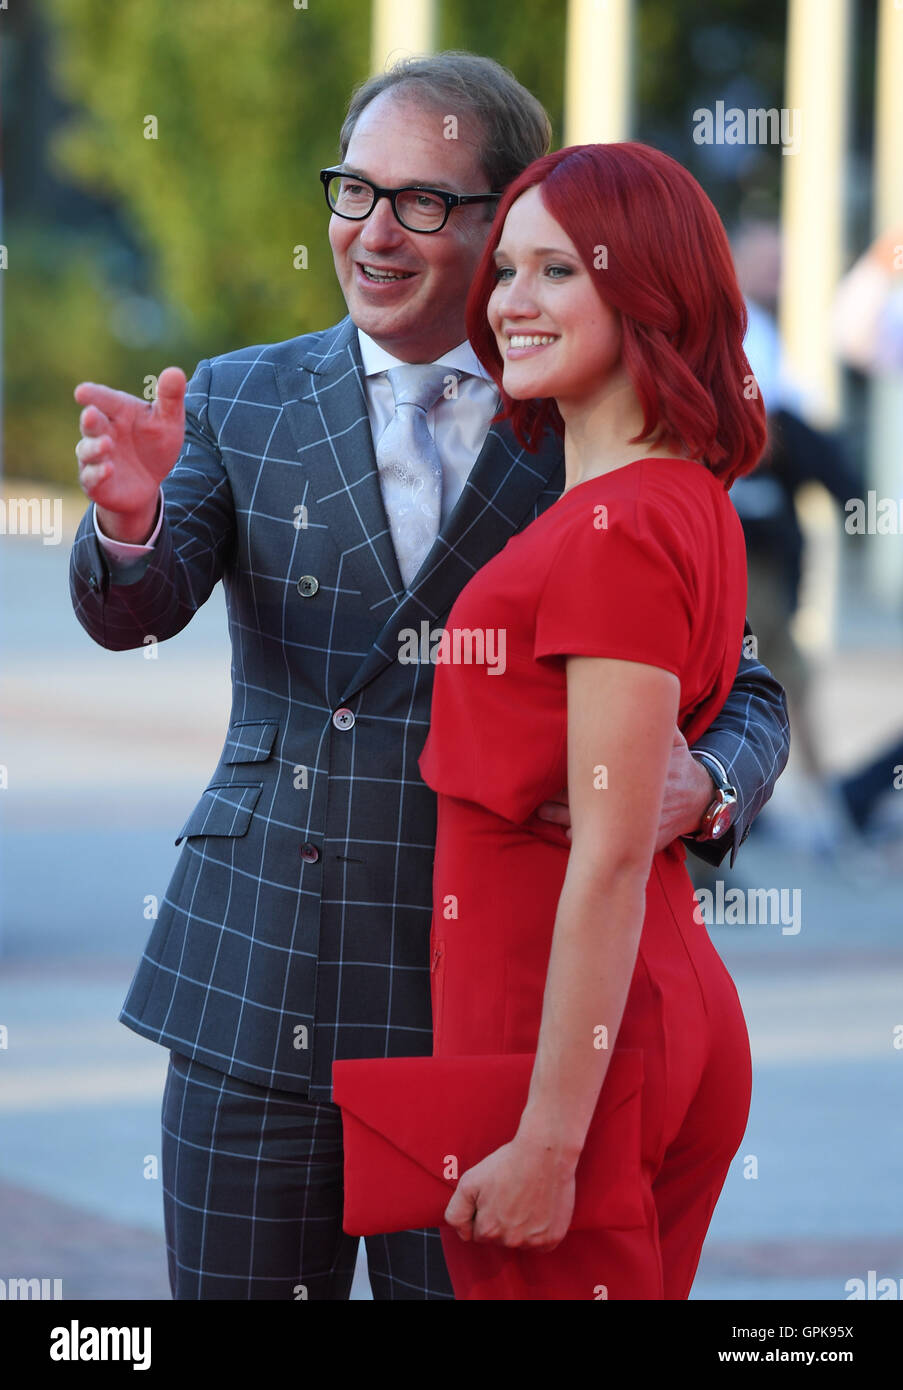 Berlin, Germany. 1st Sep, 2016. German Minister of Traffic Alexander Dobrindt (CSU) and Miss IFA posing during the opening gala of the Internationale Funk-Ausstellung IFA electronics fair in Berlin, Germany, 1 September 2016. The IFA is known as the world's biggest fair for entertainment technology, IT and household appliances and takes place between 2 and 7 September 2016. PHOTO: SOEREN STACHE/dpa/Alamy Live News Stock Photo